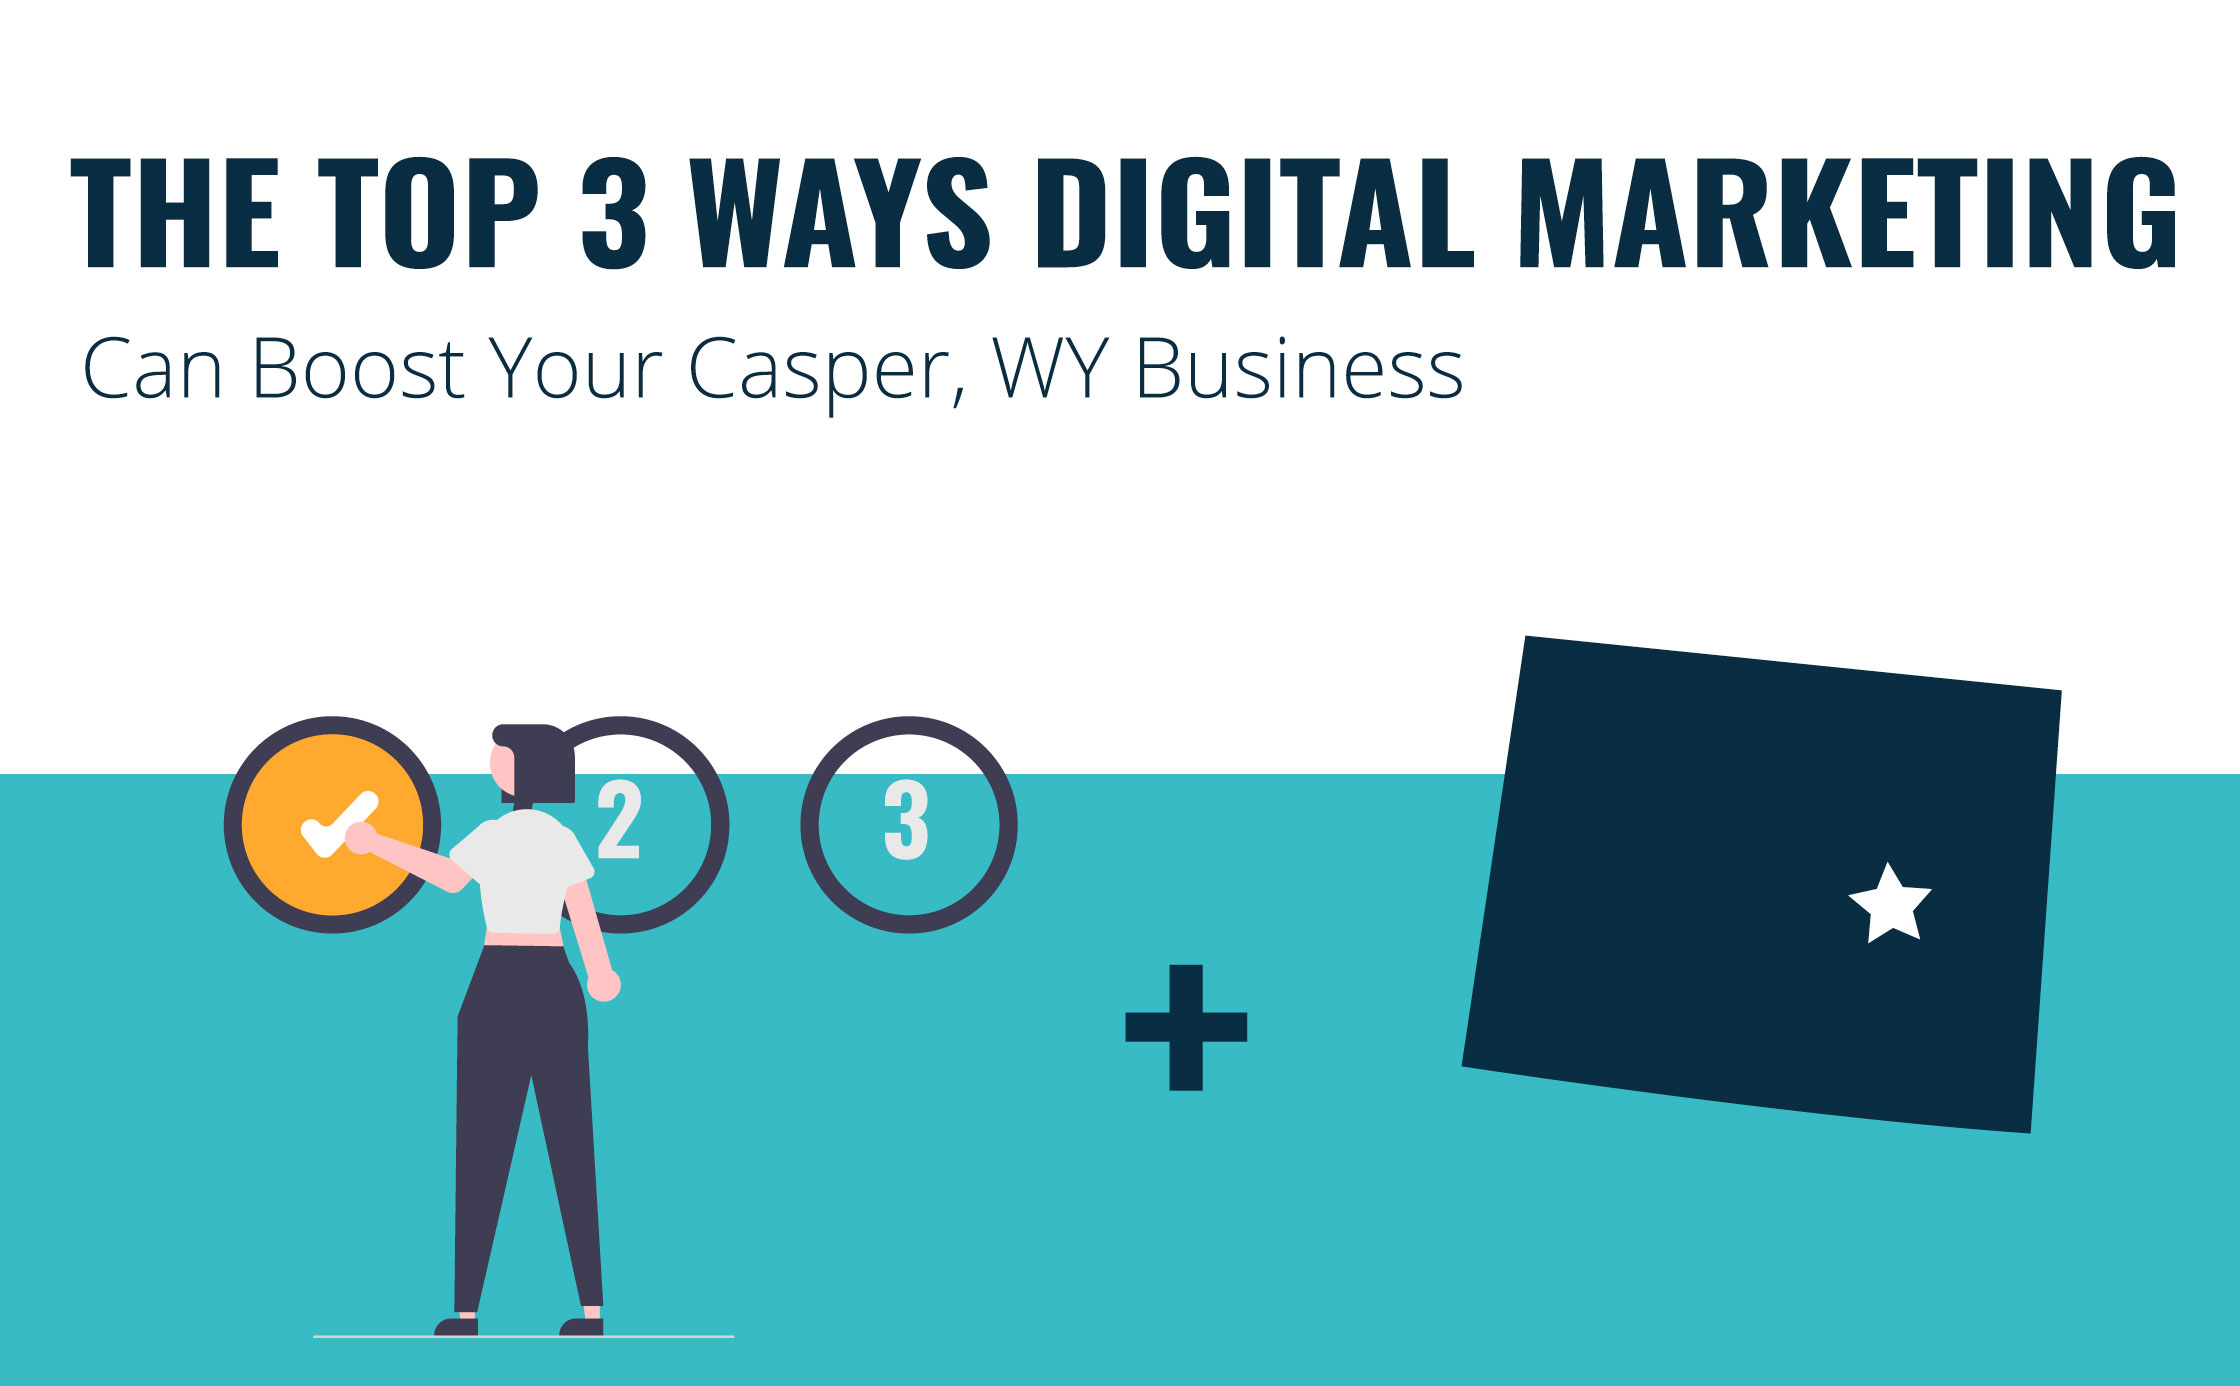 The Top 3 Ways Digital Marketing Can Boost Your Casper, WY Business